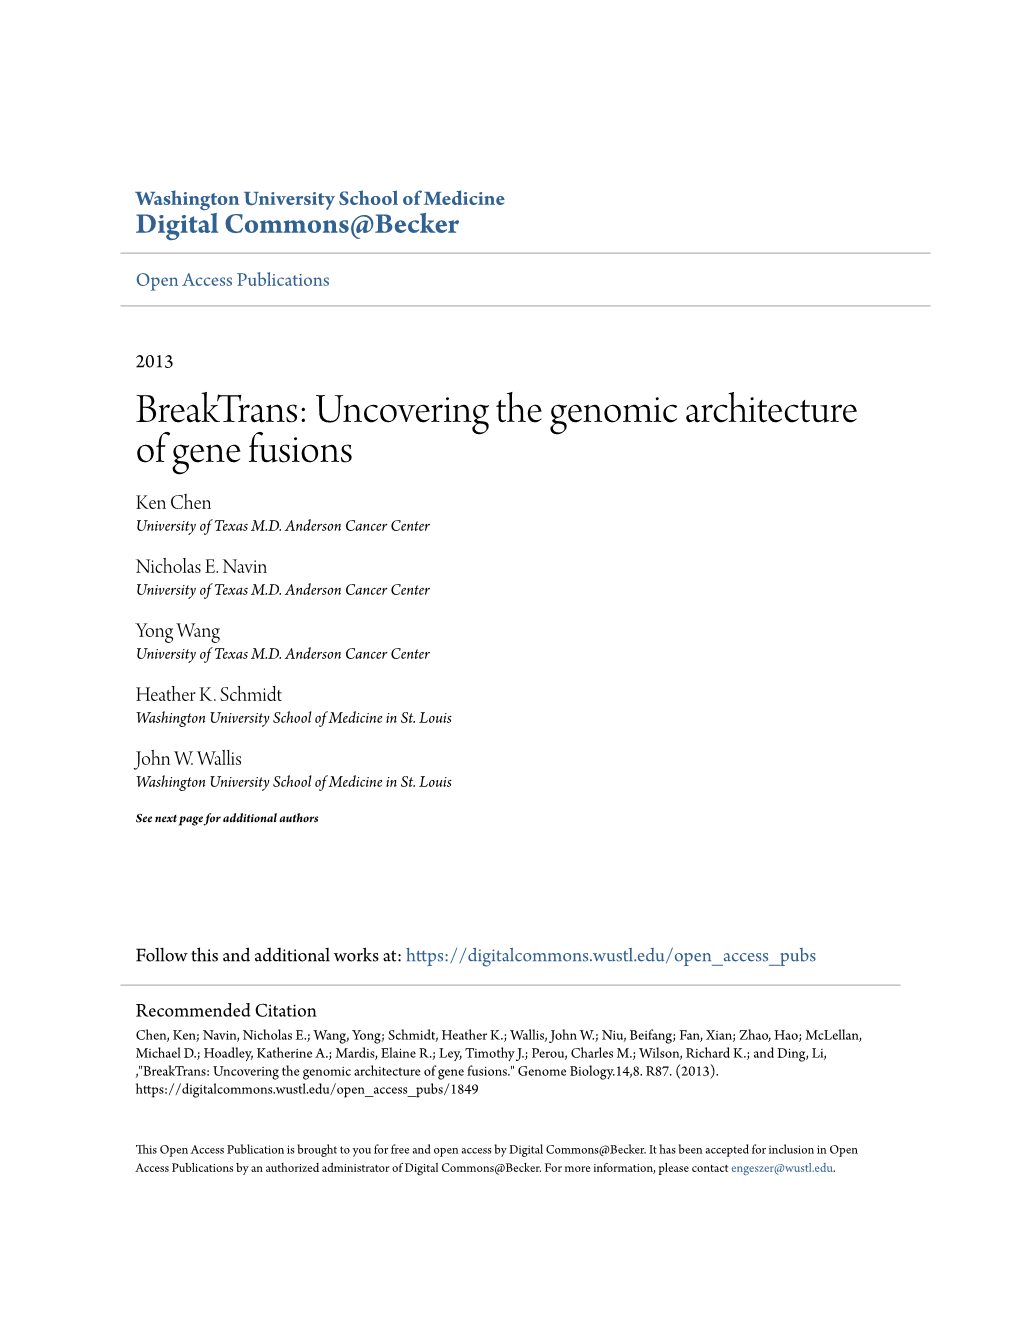 Uncovering the Genomic Architecture of Gene Fusions Ken Chen University of Texas M.D